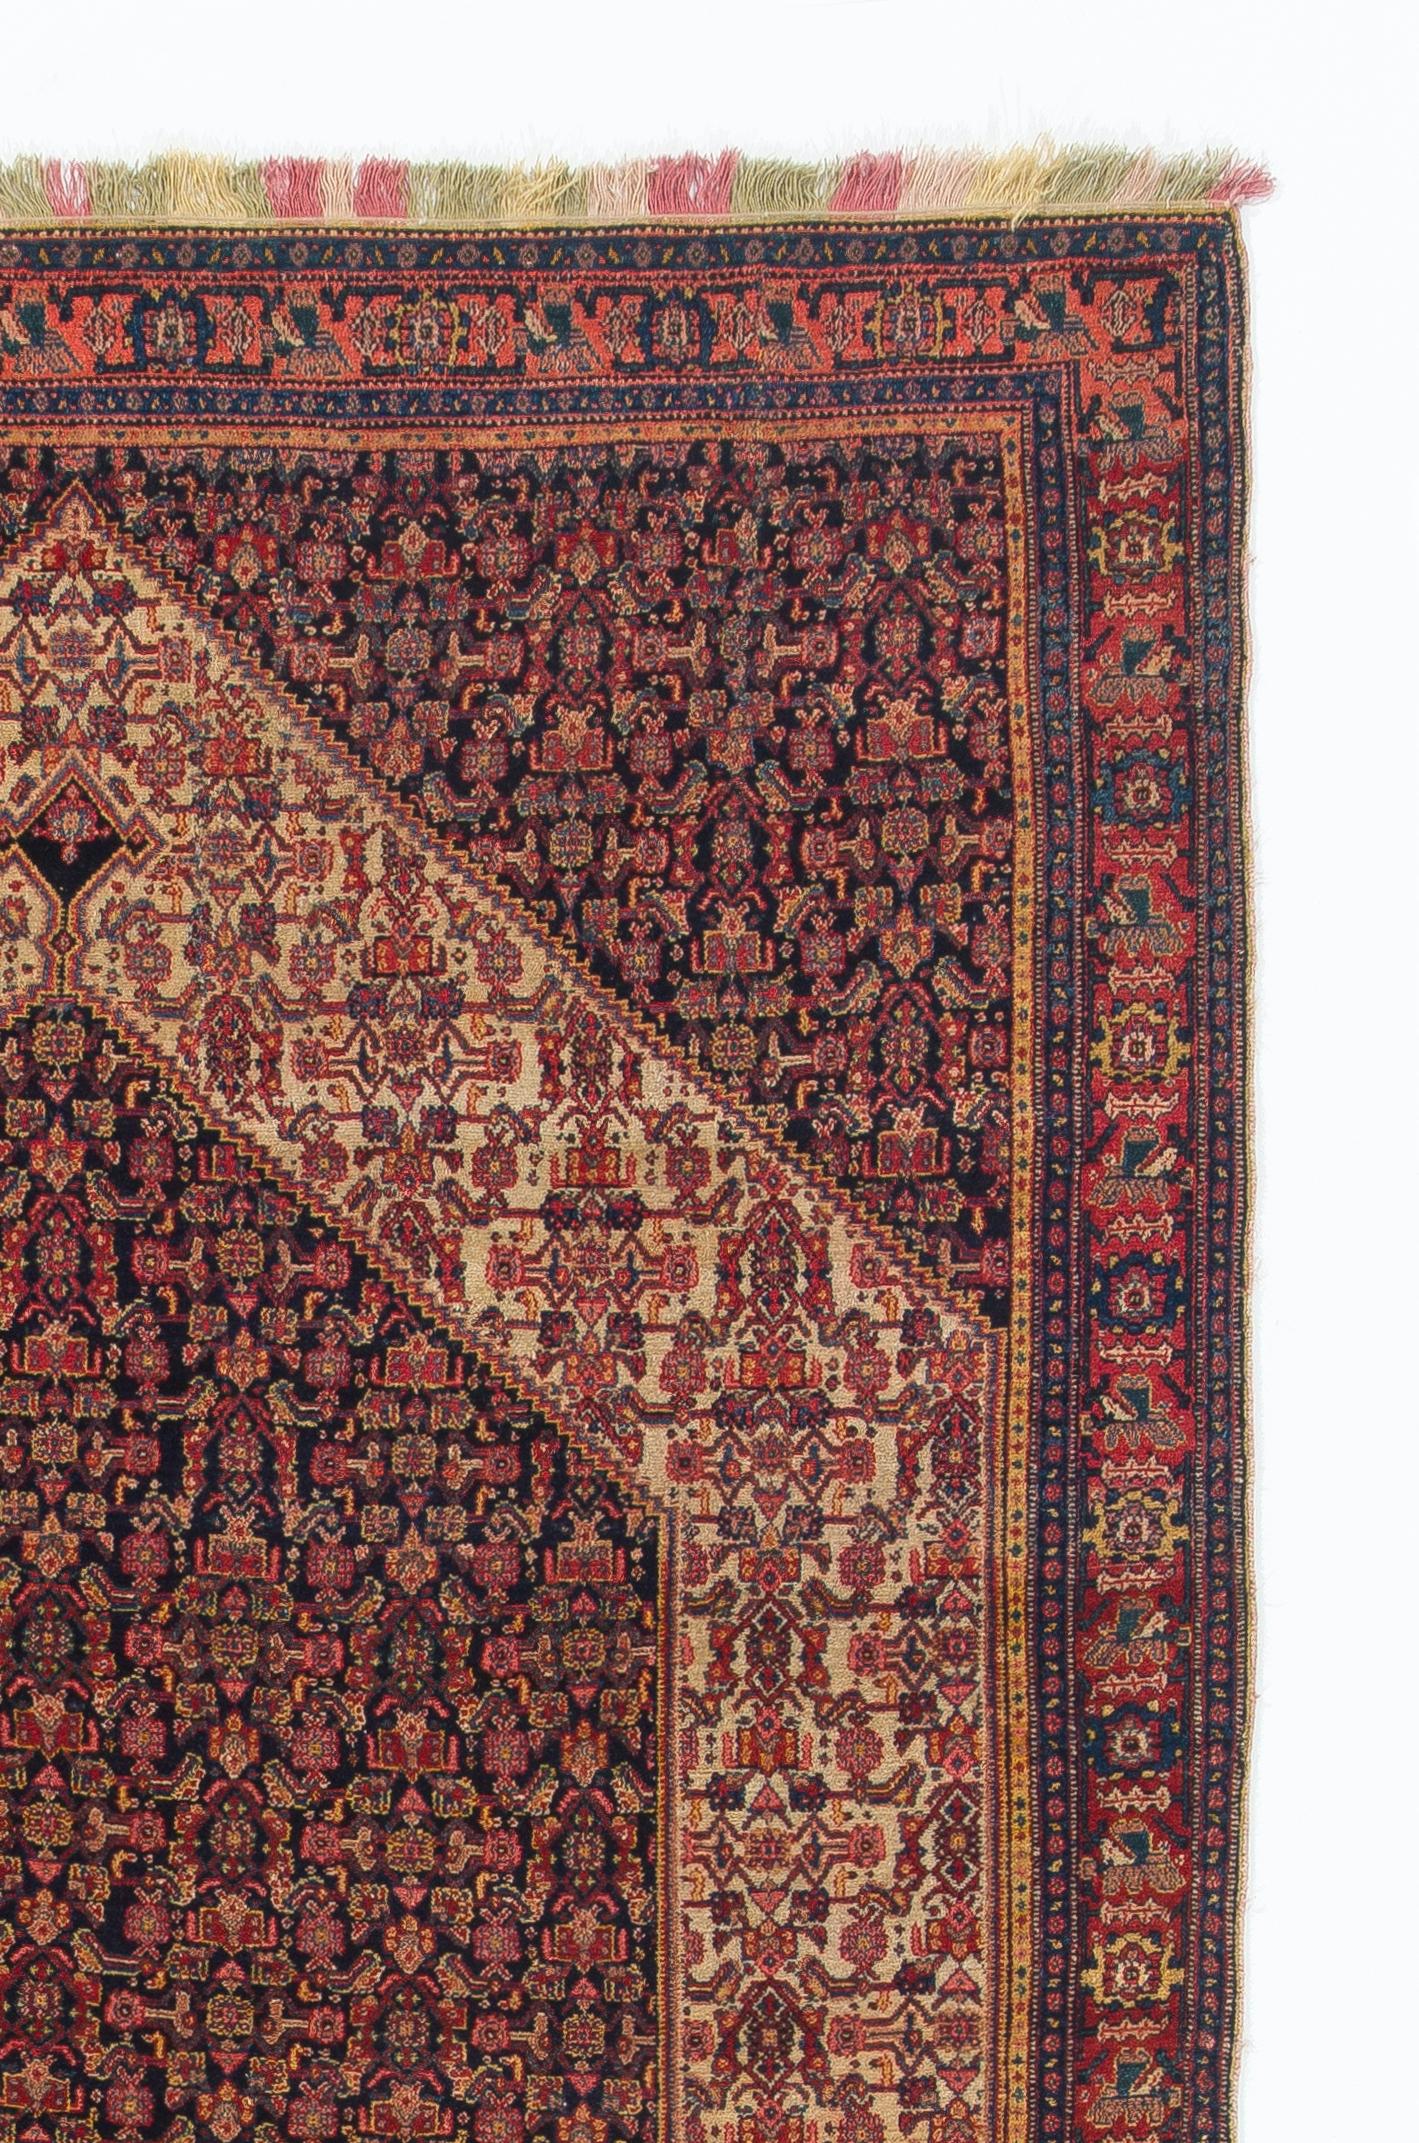 Hand-Woven 4.3x6.8 ft Fine Antique Persian Senneh Wool Rug with Colorful Silk Warps & Wefts For Sale